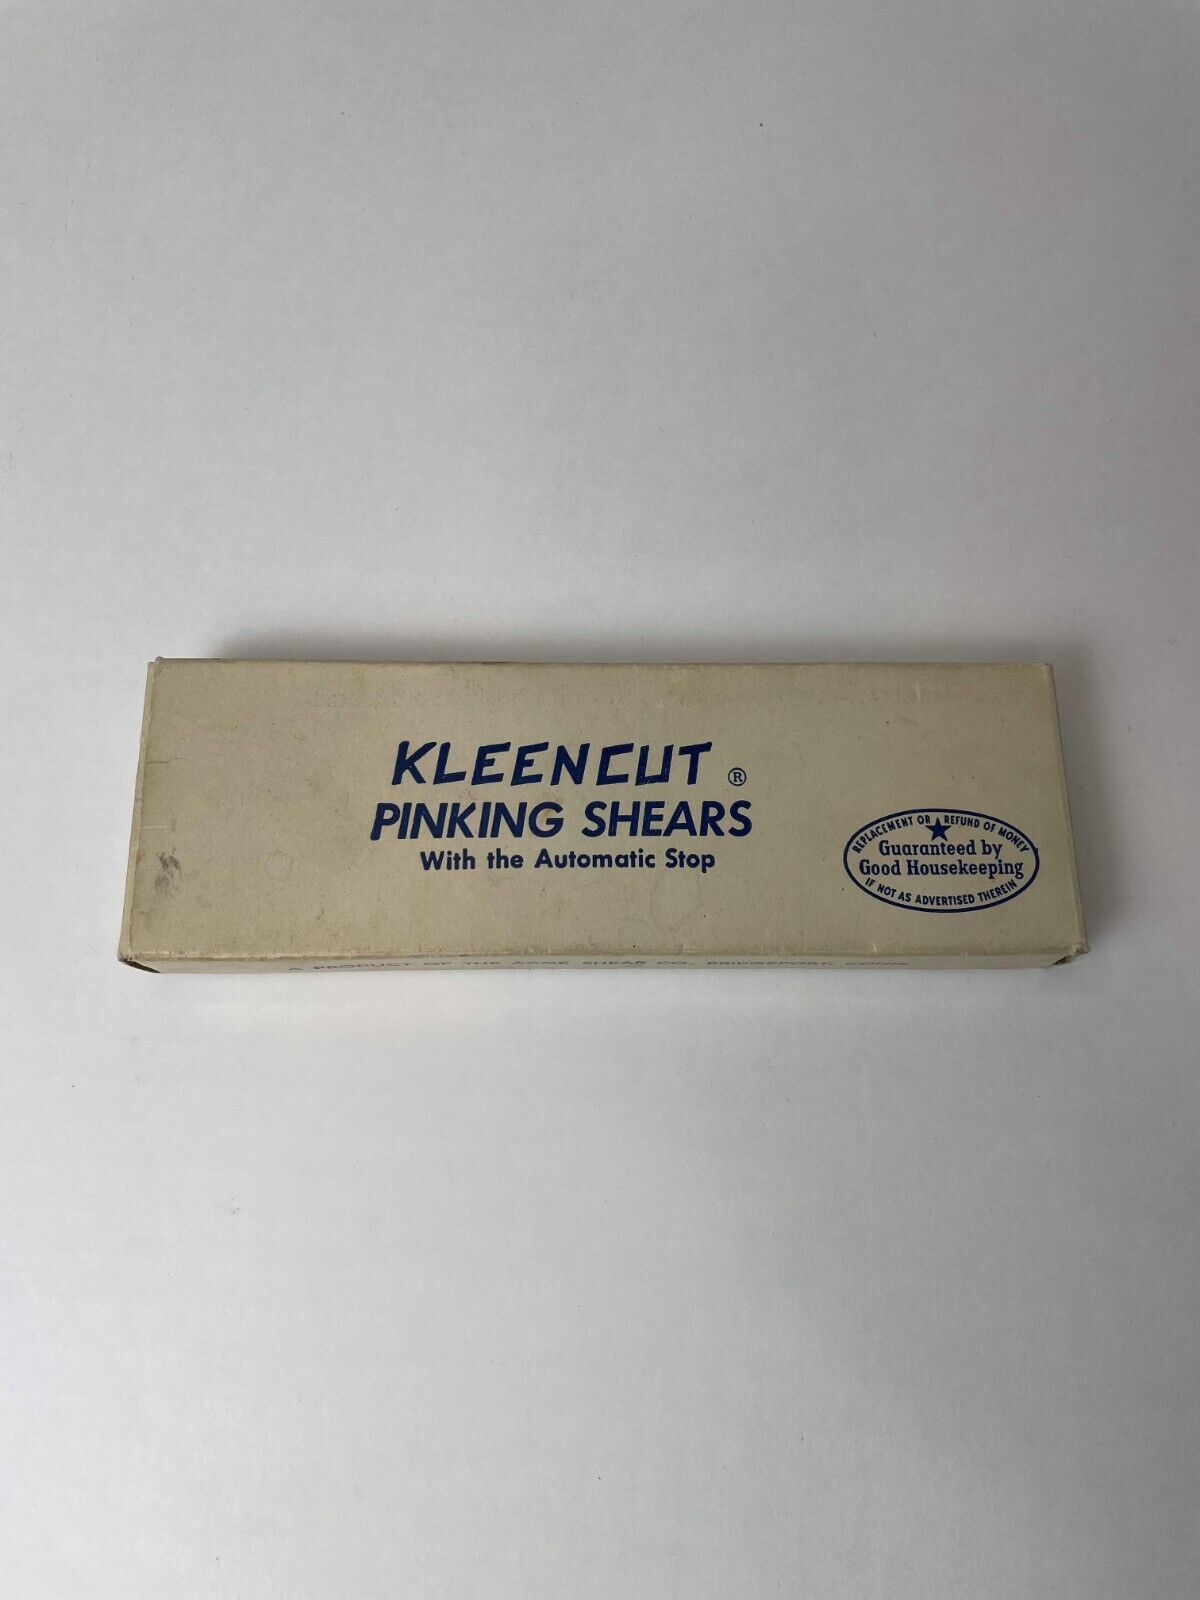 Vintage Kleencut Pinking Shears Fabric Scissors with Automatic Stop Original Box